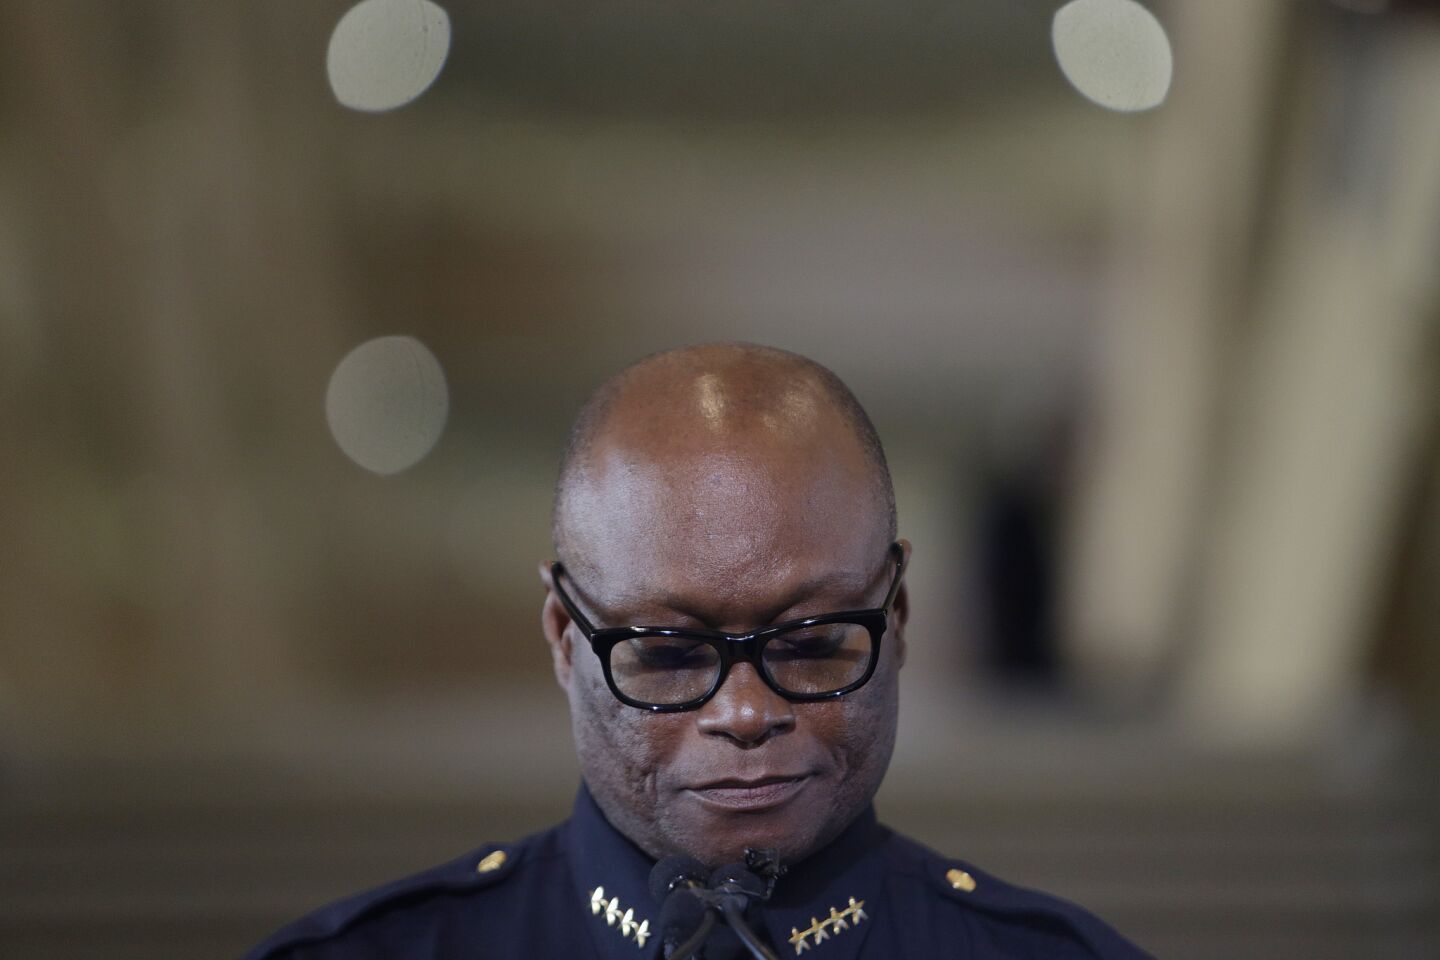 During a news conference Friday, Dallas Police Chief David Brown collects himself while talking about Thursday night's deadly shooting.